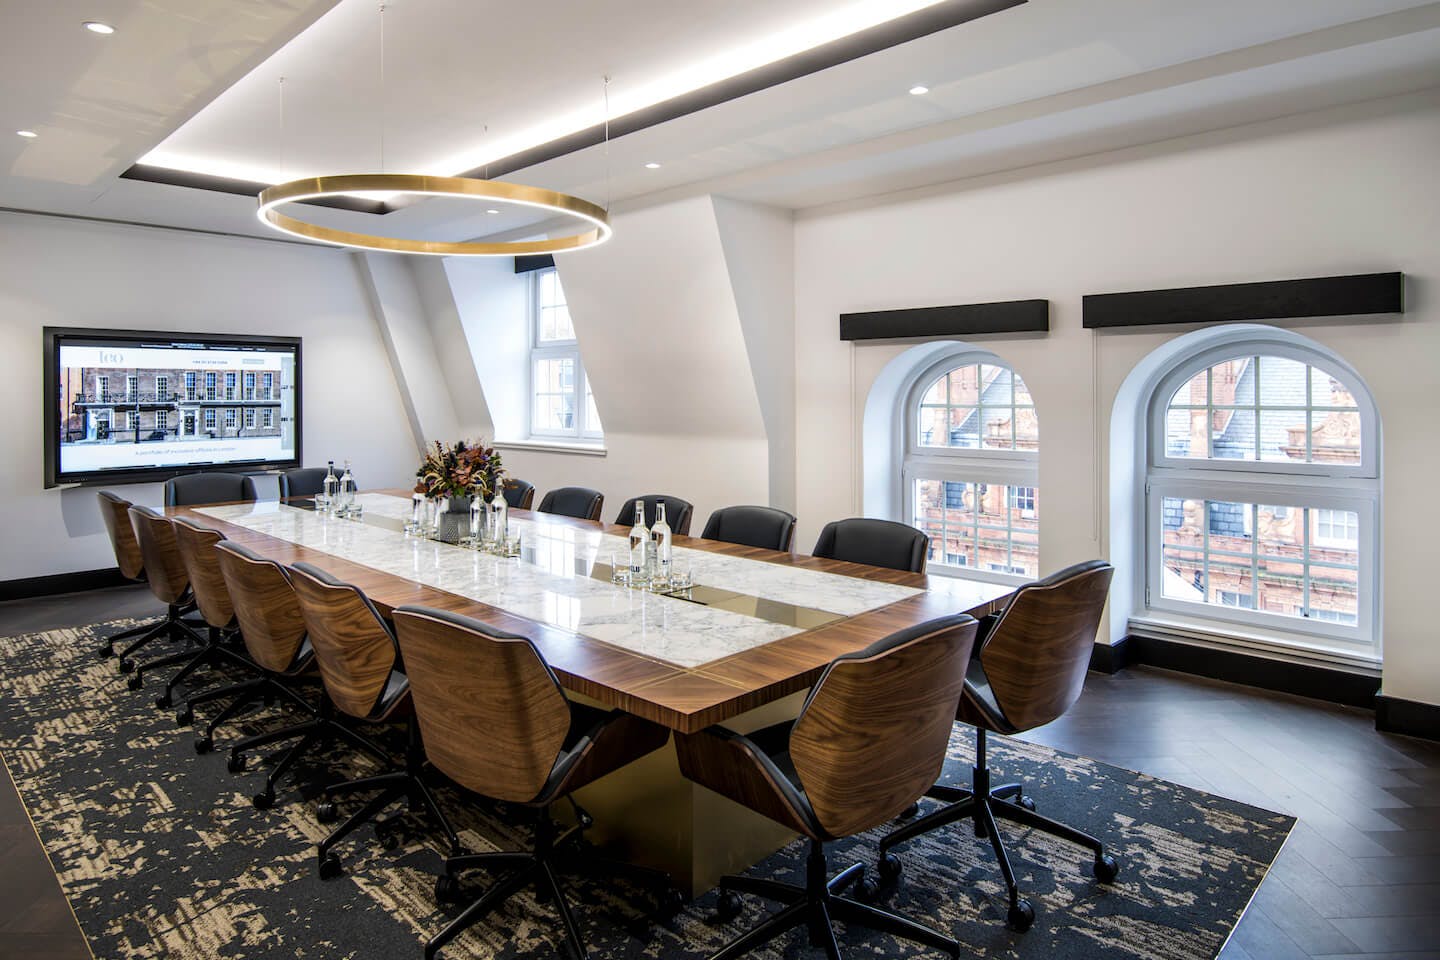 Mayfair – 8 Person Office – North Audley Street